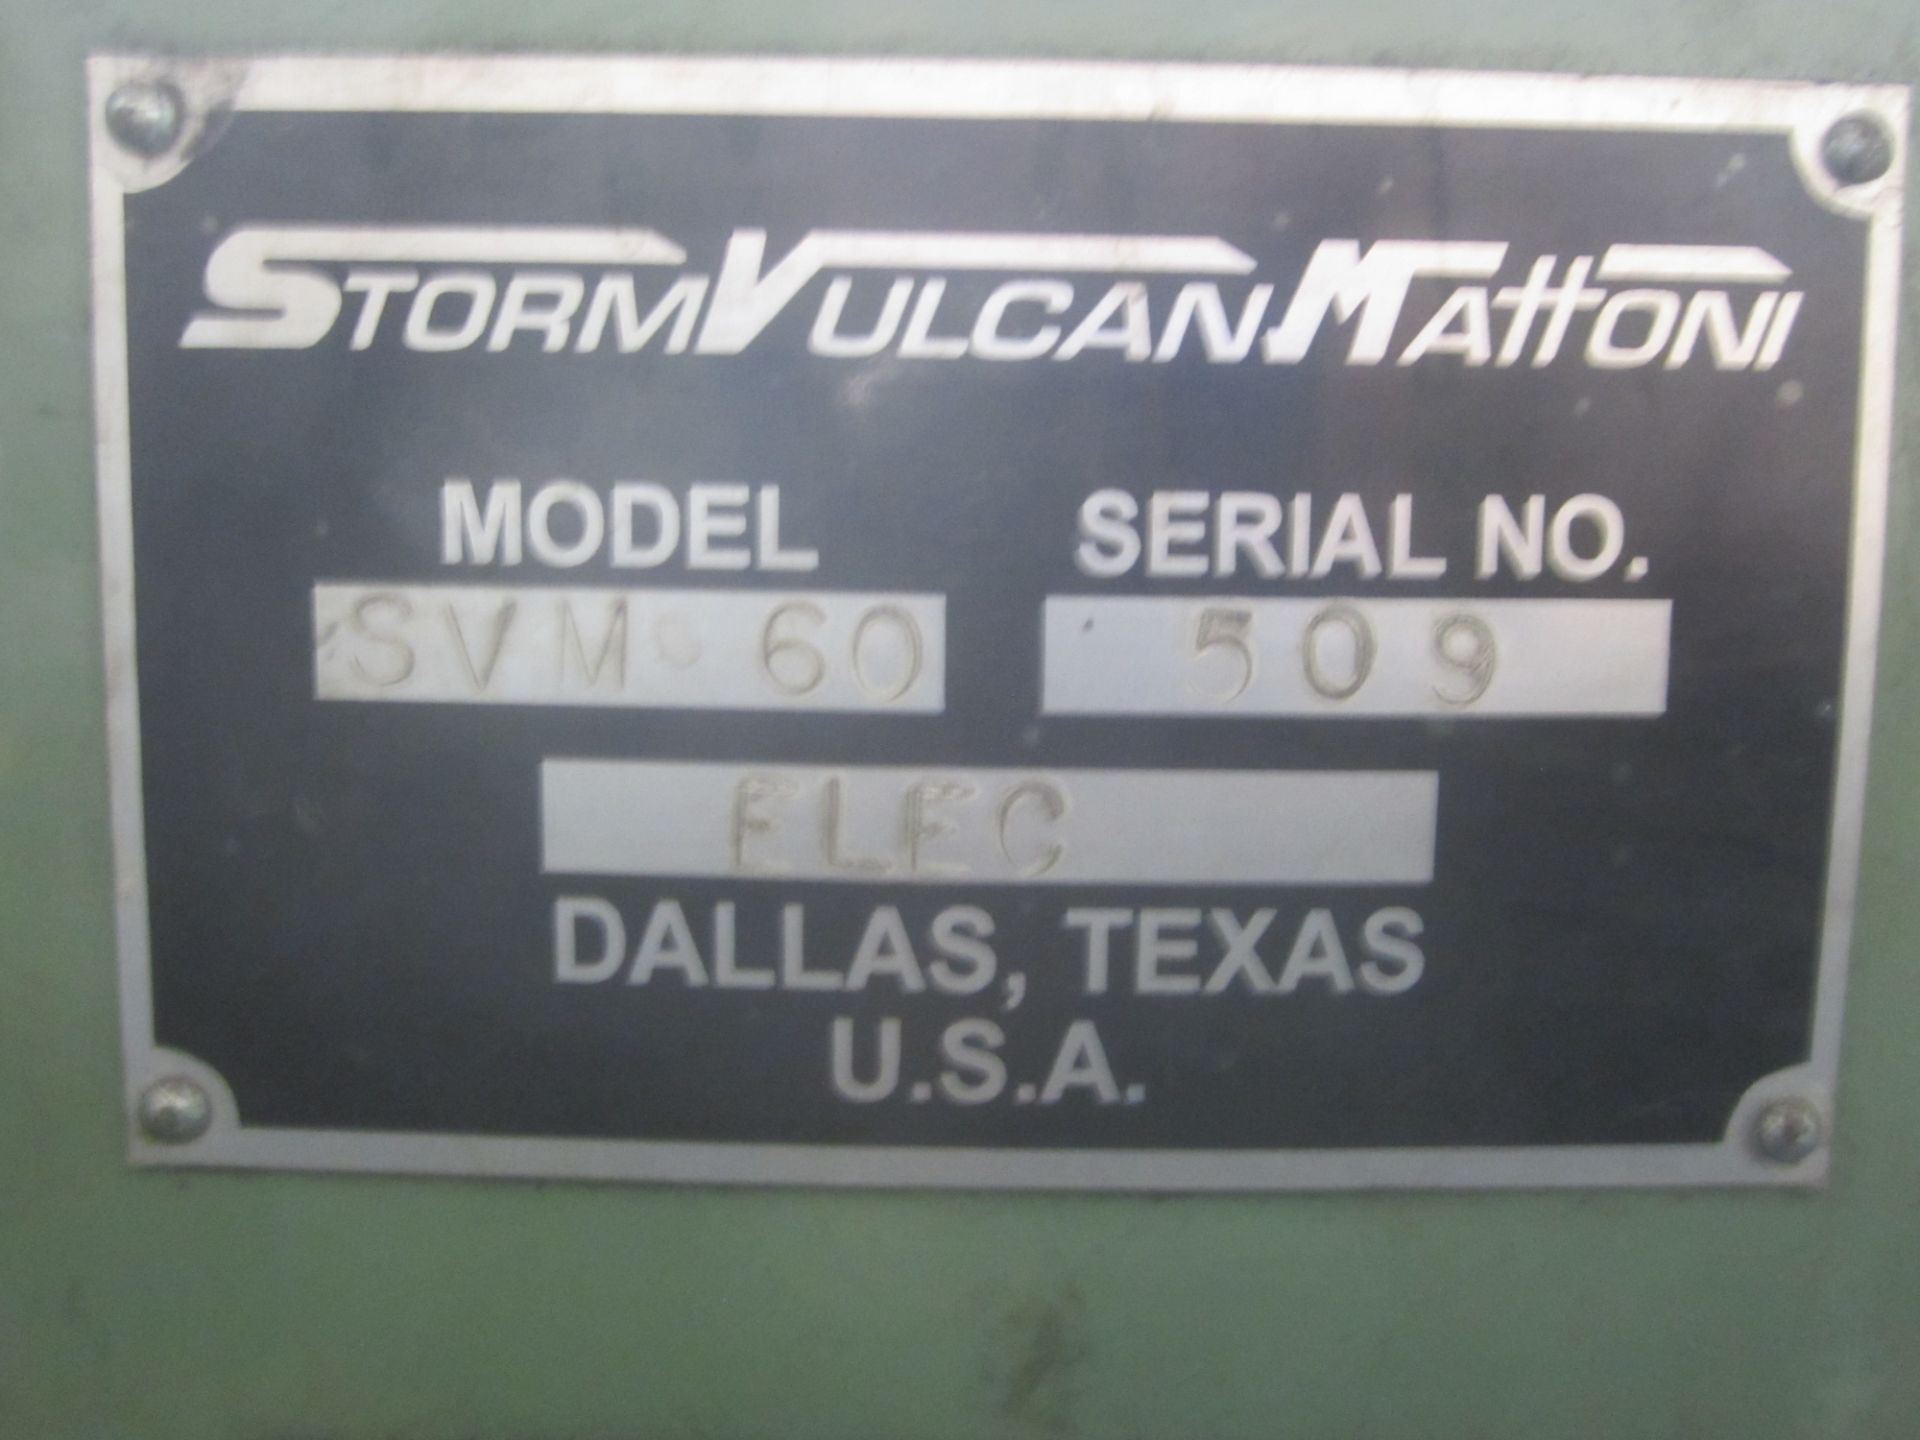 Storm Vulcan Mattoni Model SVM60 Electric Heated Jet Master Parts Washer, s/n 509, 5 HP Pump, 24" - Image 7 of 7